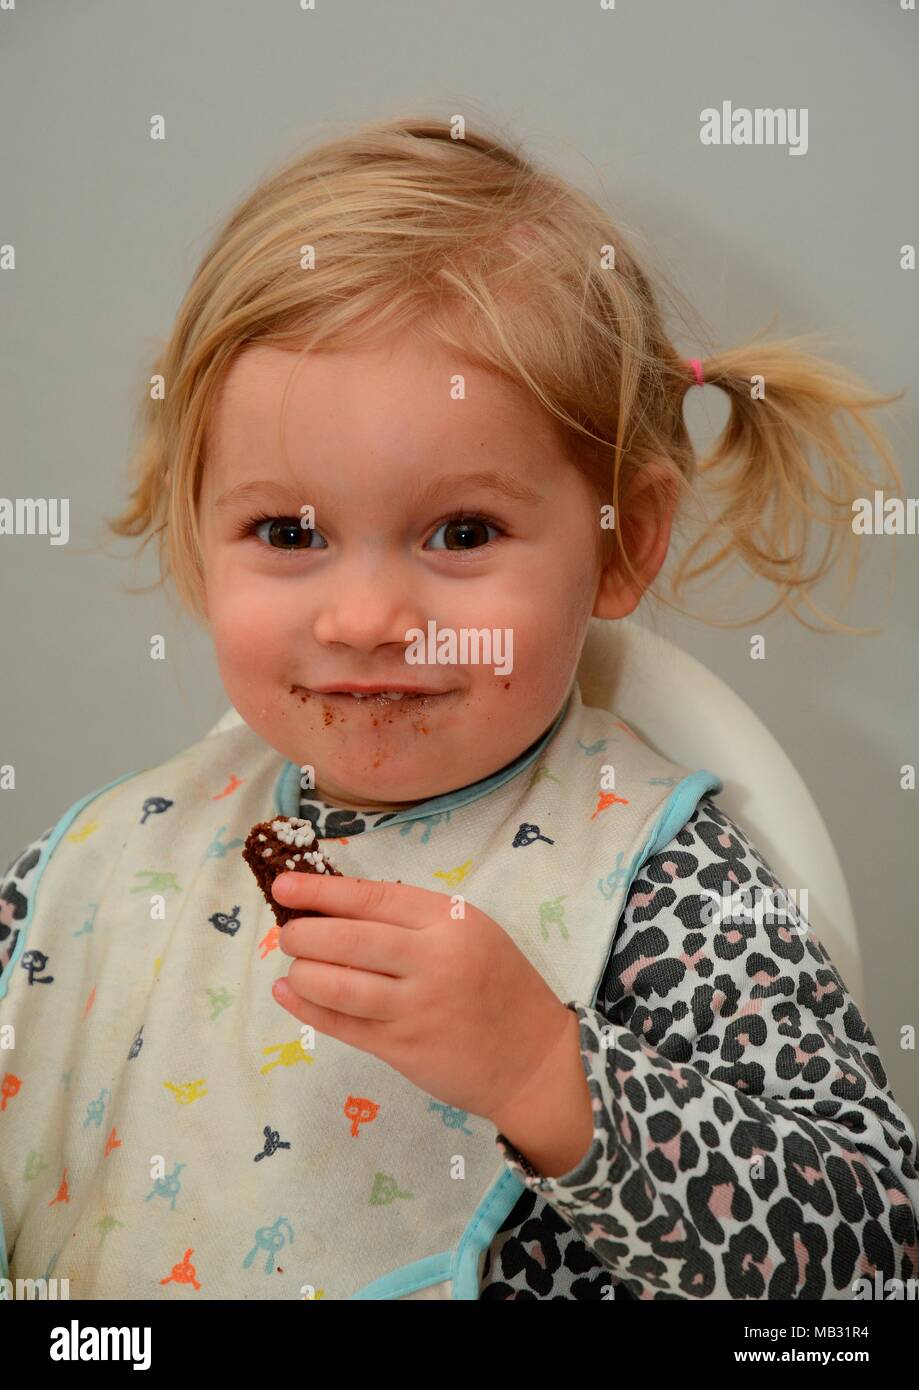 Little blond girl, two years old, smile while she eat a cake, Sweden Stock Photo